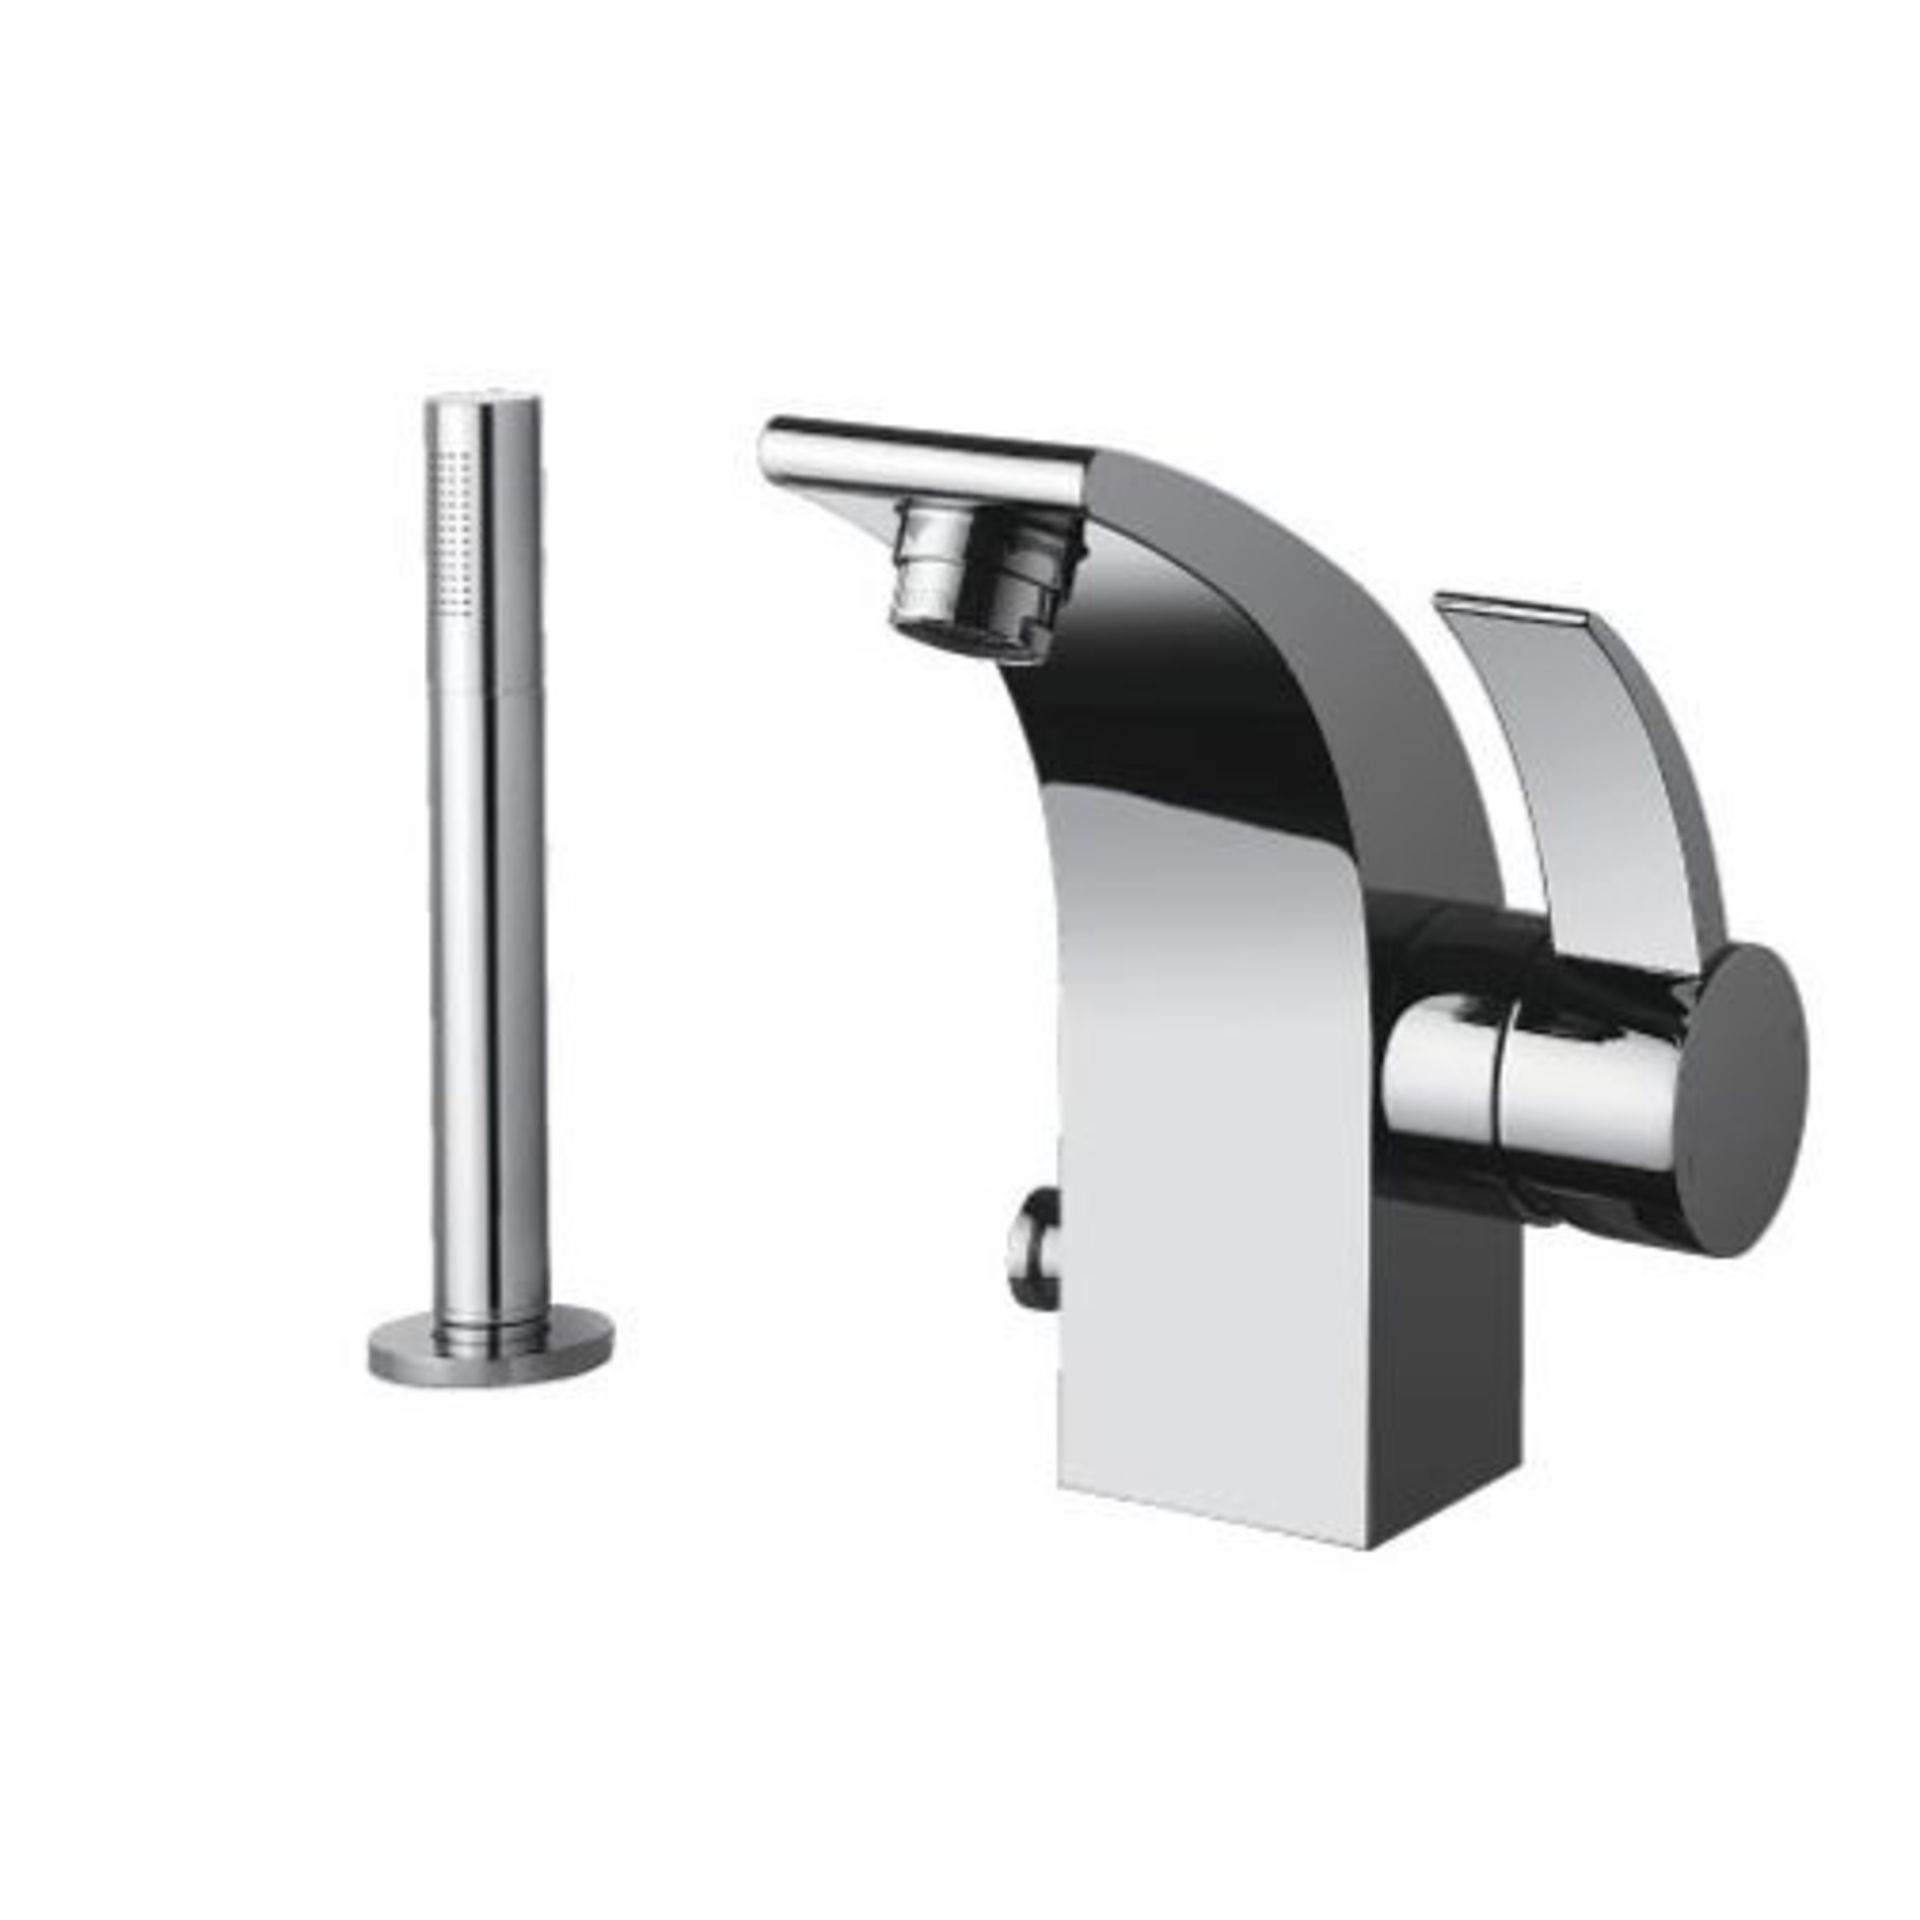 BATHSTORE 'SUBLIME' VERY HIGH QUALITY, DESIGNER BATH & SHOWER MONO MIXER TAP. SOLID BRASS